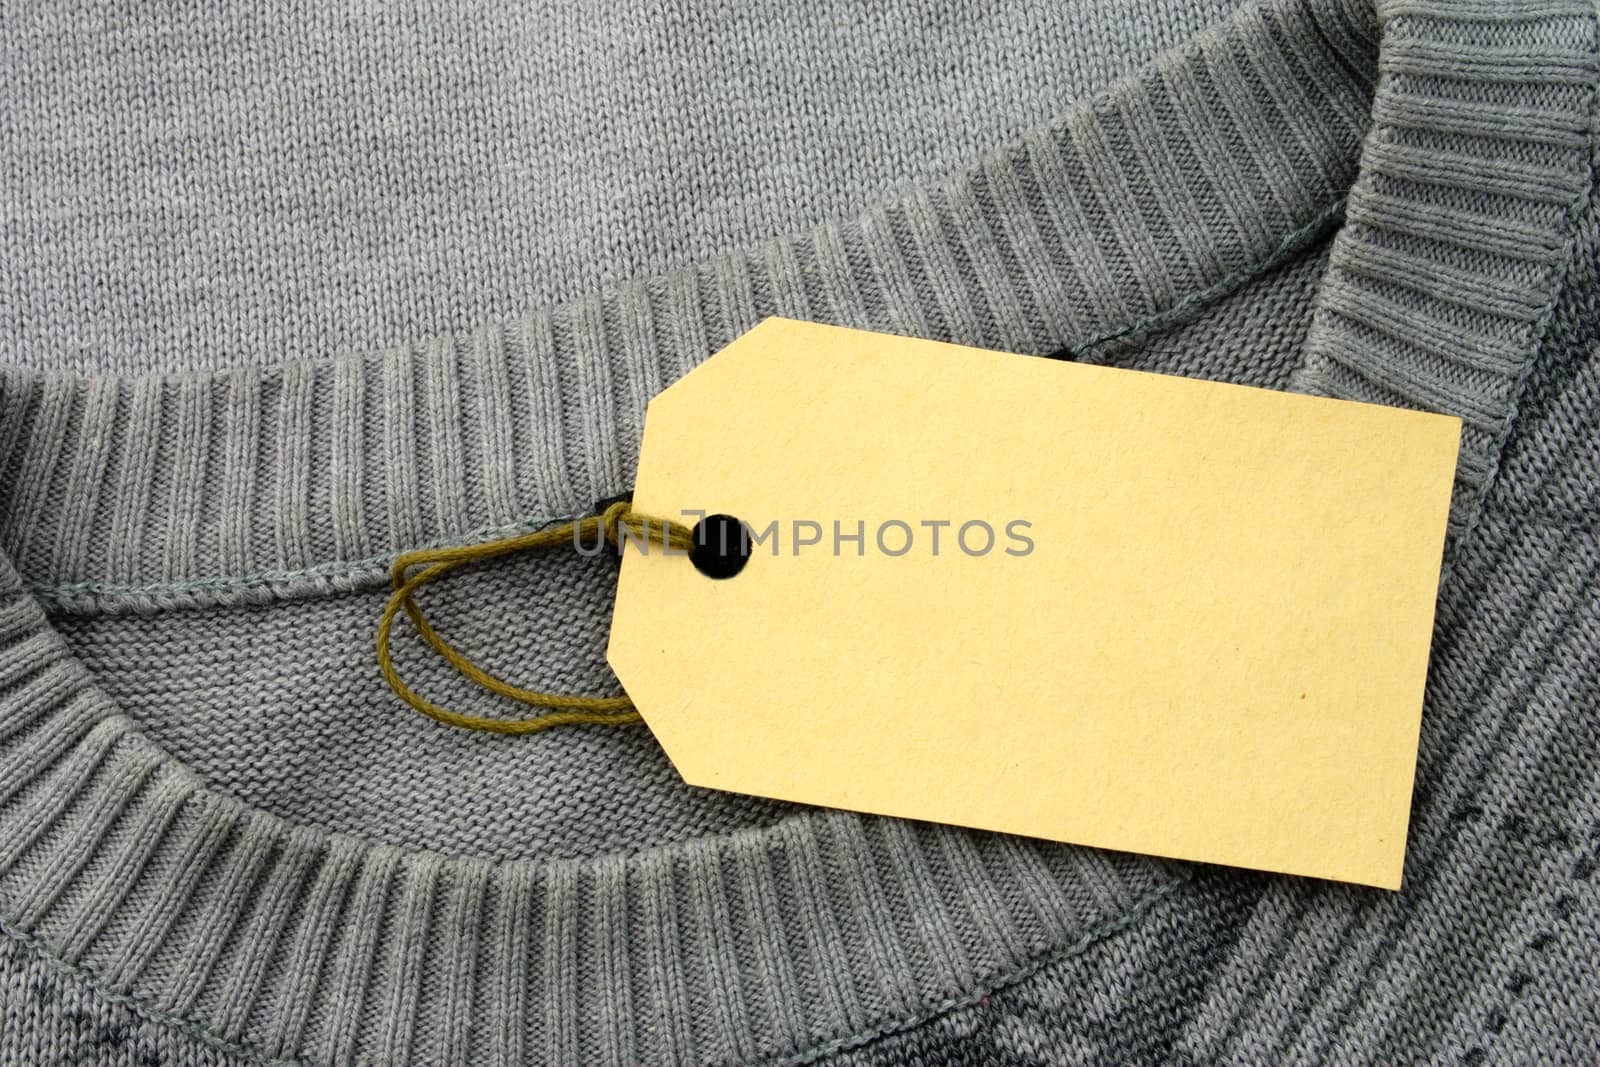 The label is attached to a sweater of gray color